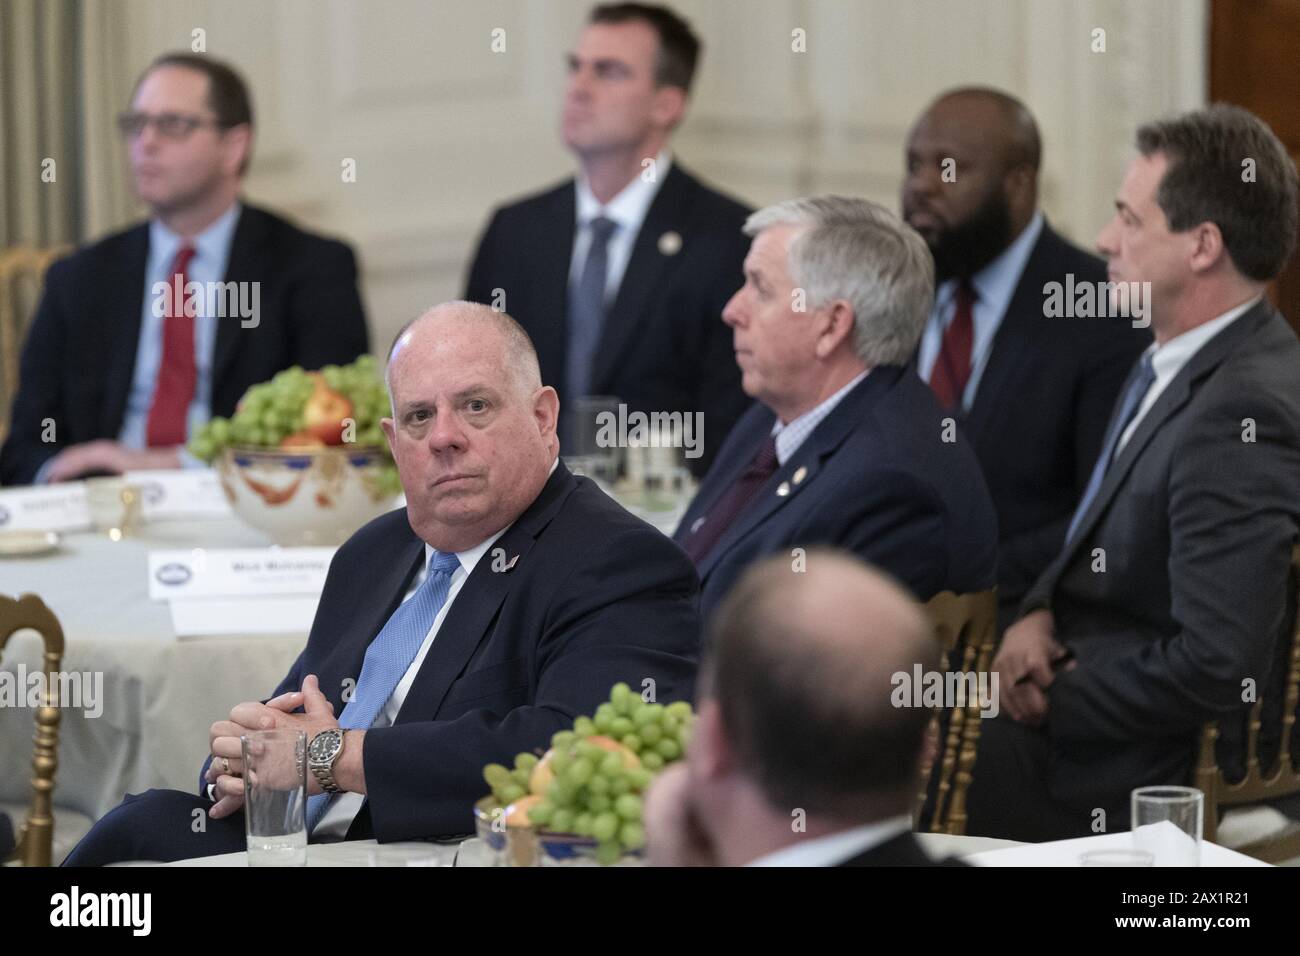 Washington, United States. 10th Feb, 2020. Gov. Larry Hogan, R-MD, listens as President Donald J. Trump speaks to a group of governors during the National Governor's Association meetings, at the White House in Washington, DC on Monday, February 10, 2020. Pool photo by Chris Kleponis/UPI Credit: UPI/Alamy Live News Stock Photo